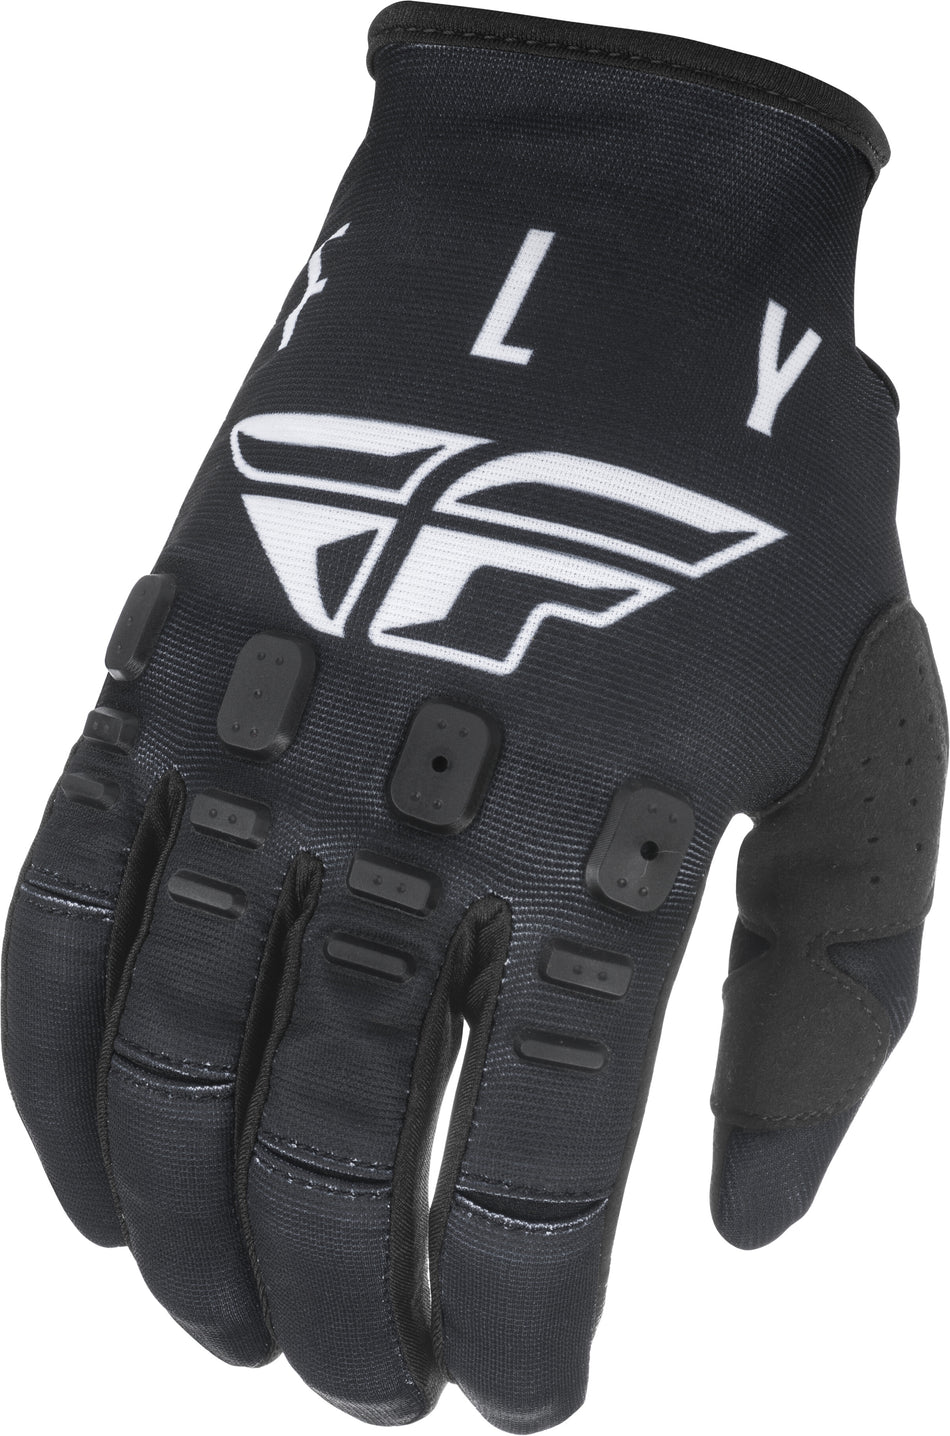 FLY RACING Youth Kinetic K121 Gloves Black/White Sz 06 374-41006